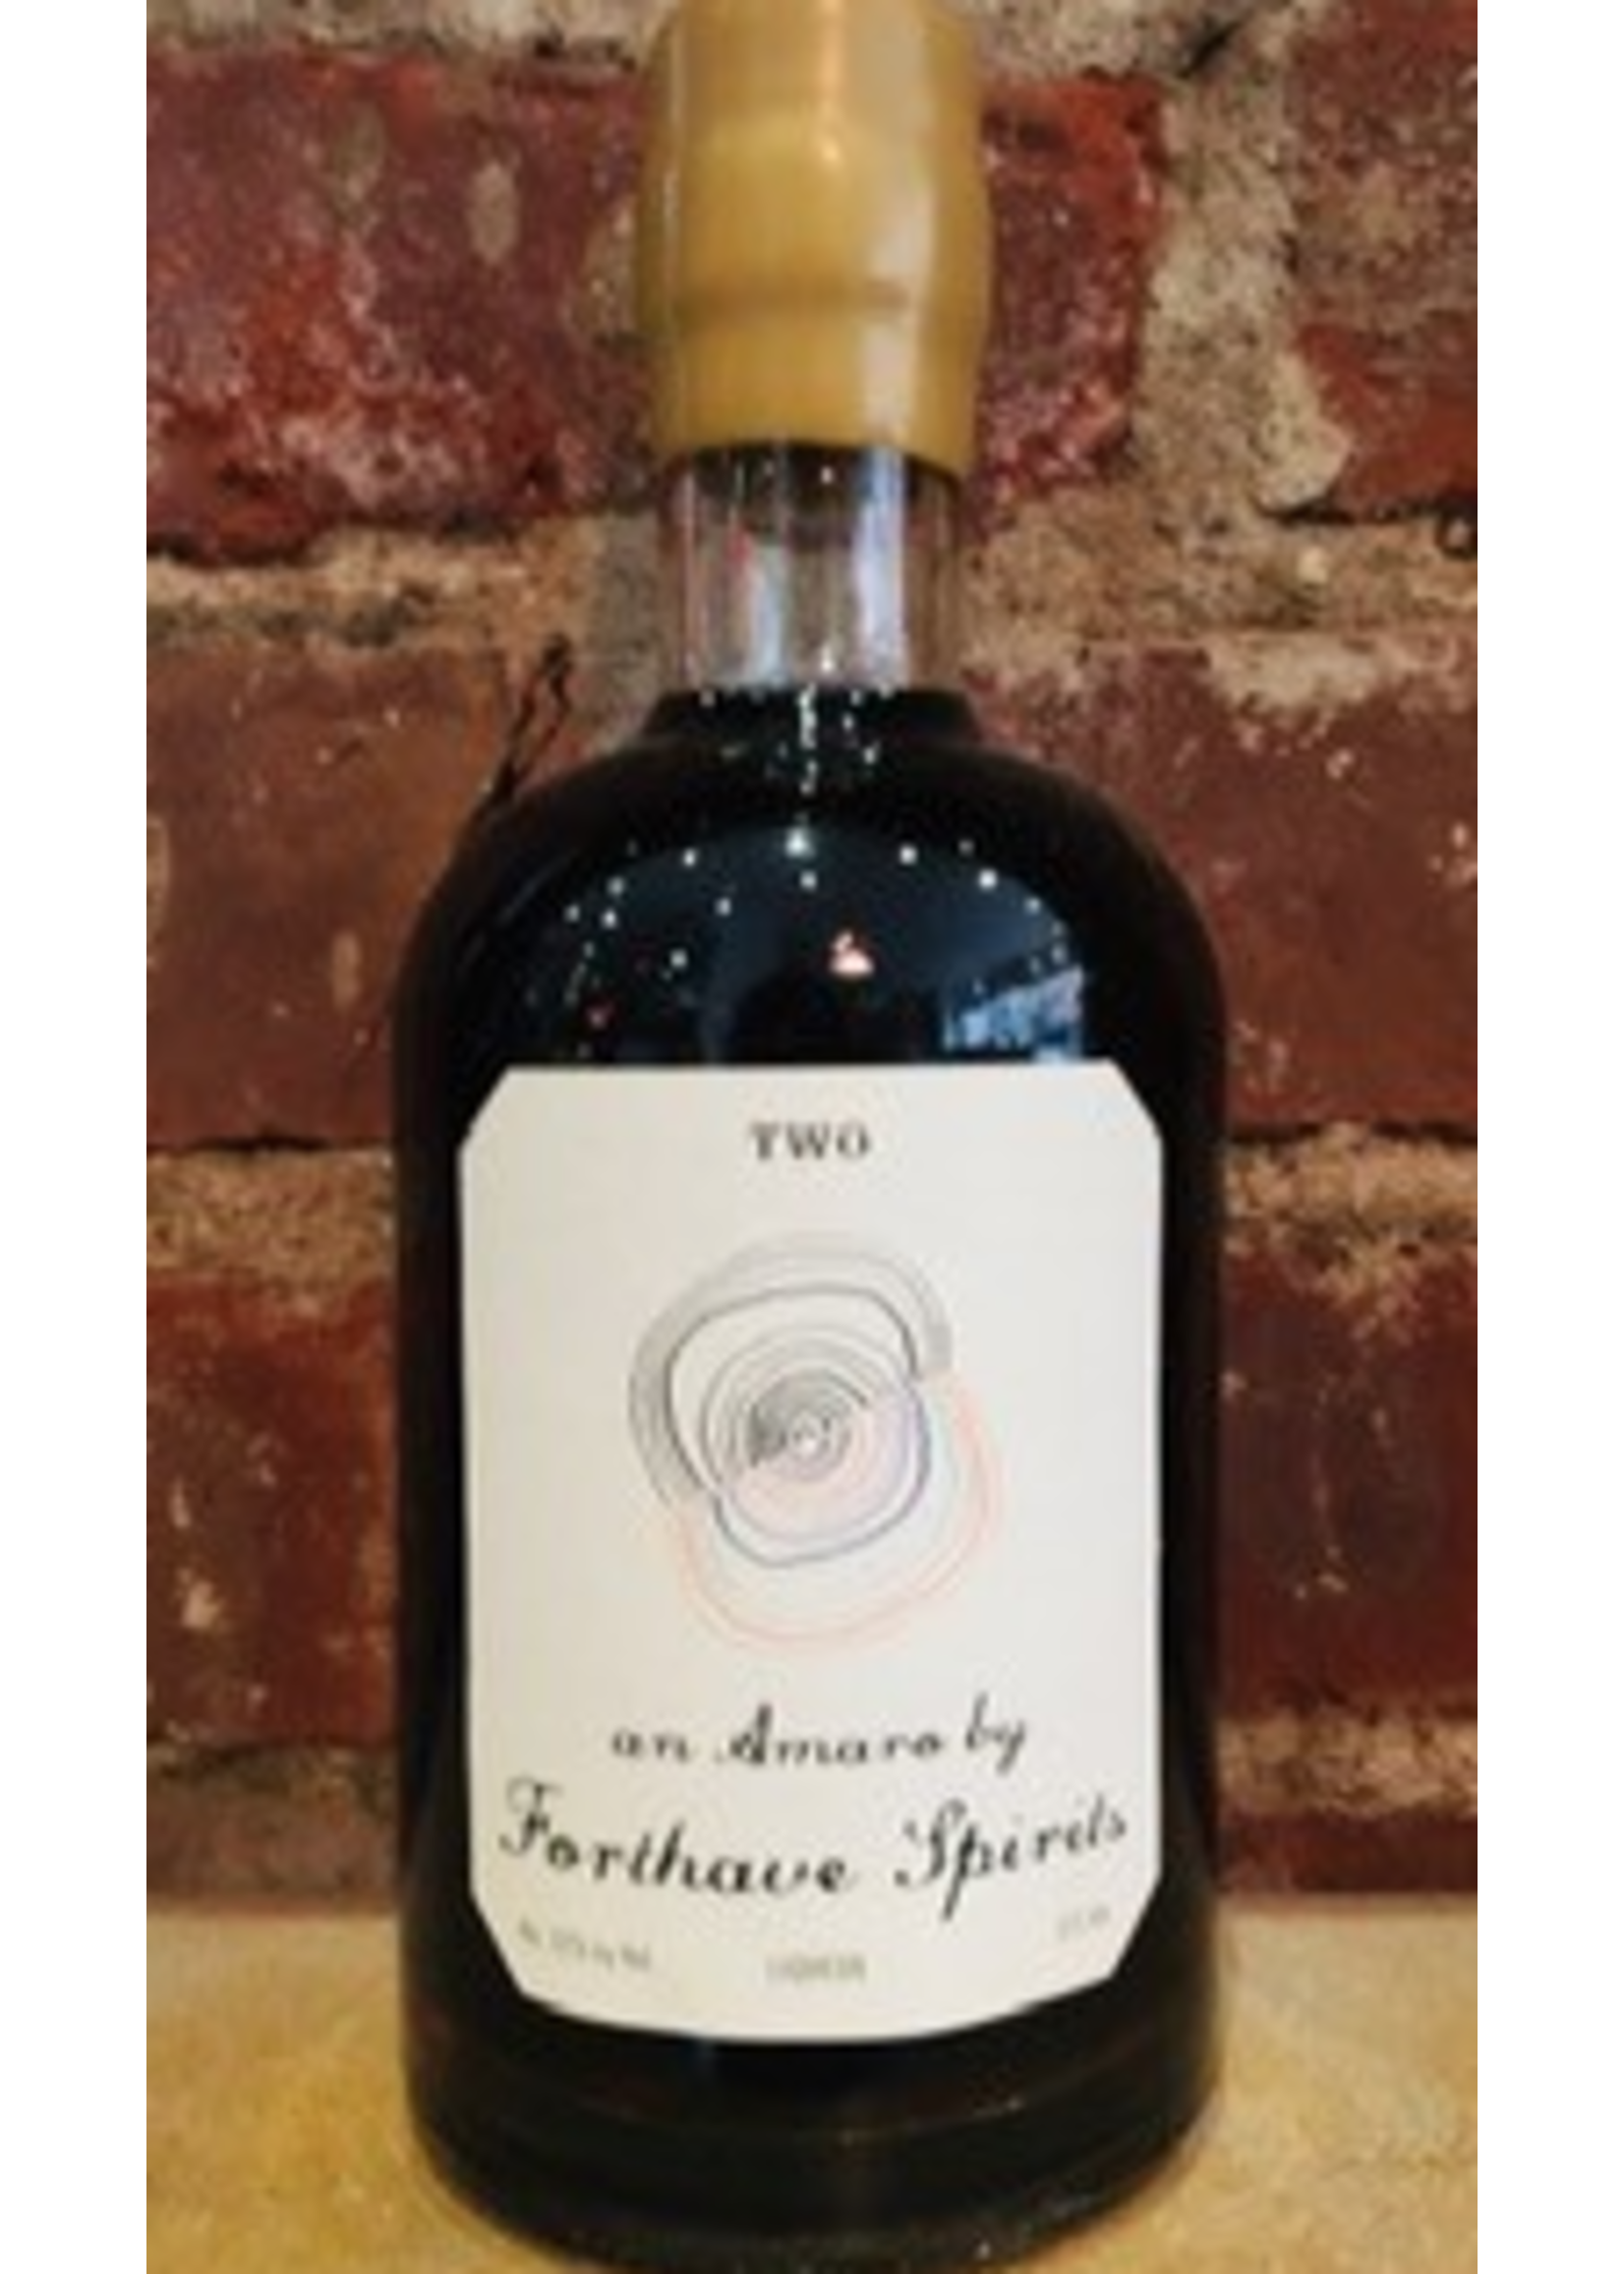 Forthave Liqueur - Forthave Spirits - Two Amaro